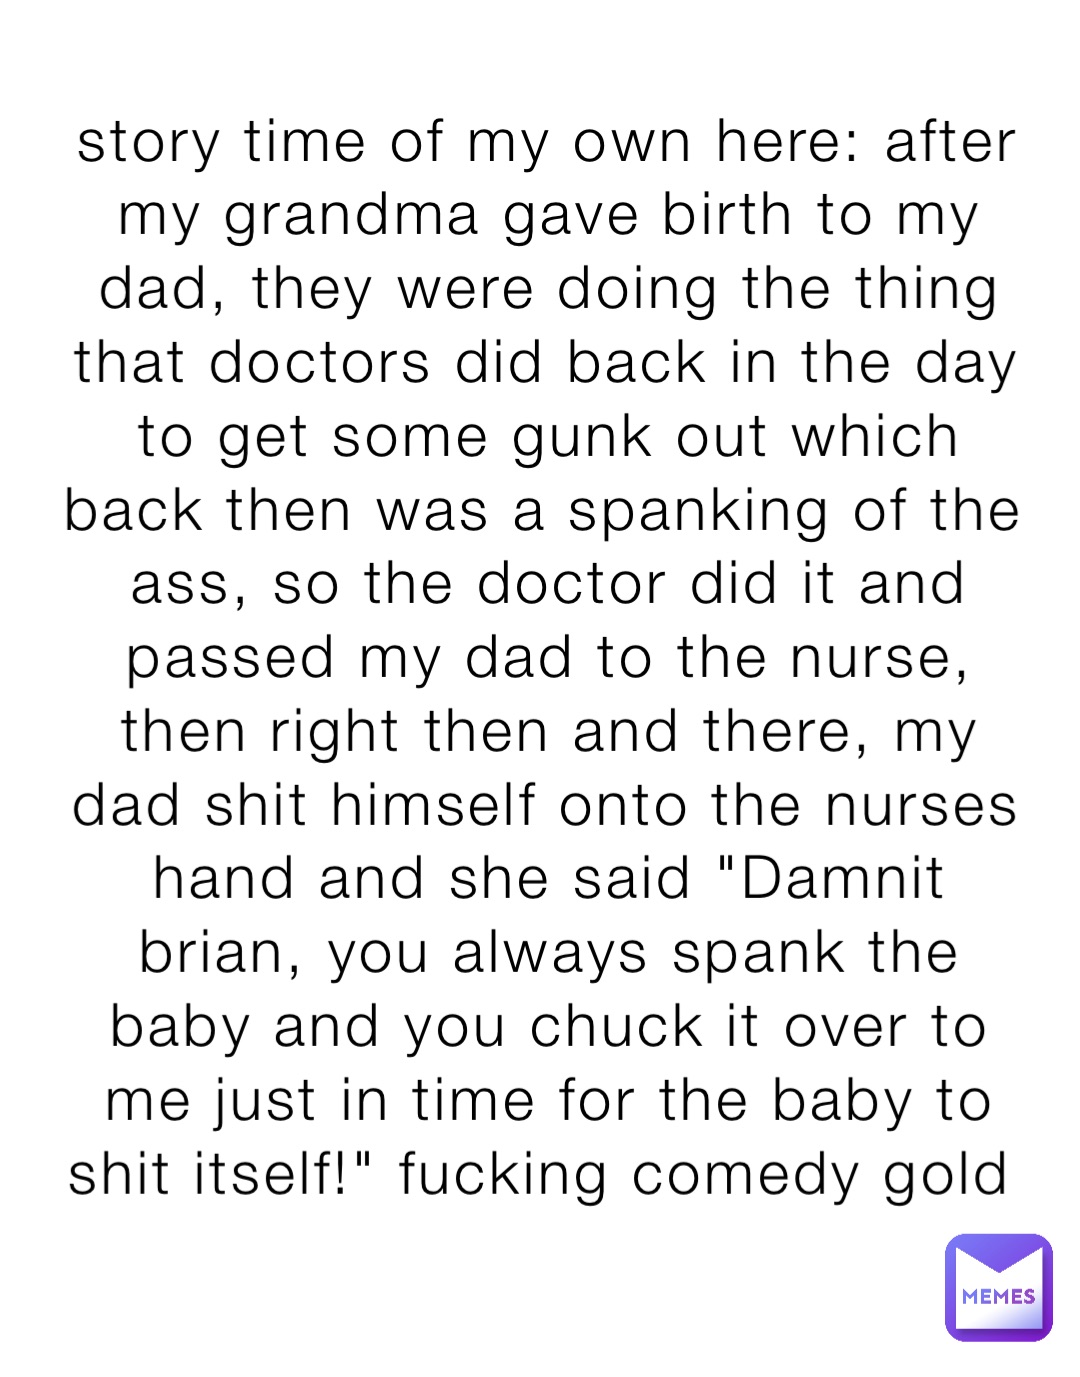 story time of my own here: after my grandma gave birth to my dad, they were doing the thing that doctors did back in the day to get some gunk out which back then was a spanking of the ass, so the doctor did it and passed my dad to the nurse, then right then and there, my dad shit himself onto the nurses hand and she said "Damnit brian, you always spank the baby and you chuck it over to me just in time for the baby to shit itself!" fucking comedy gold